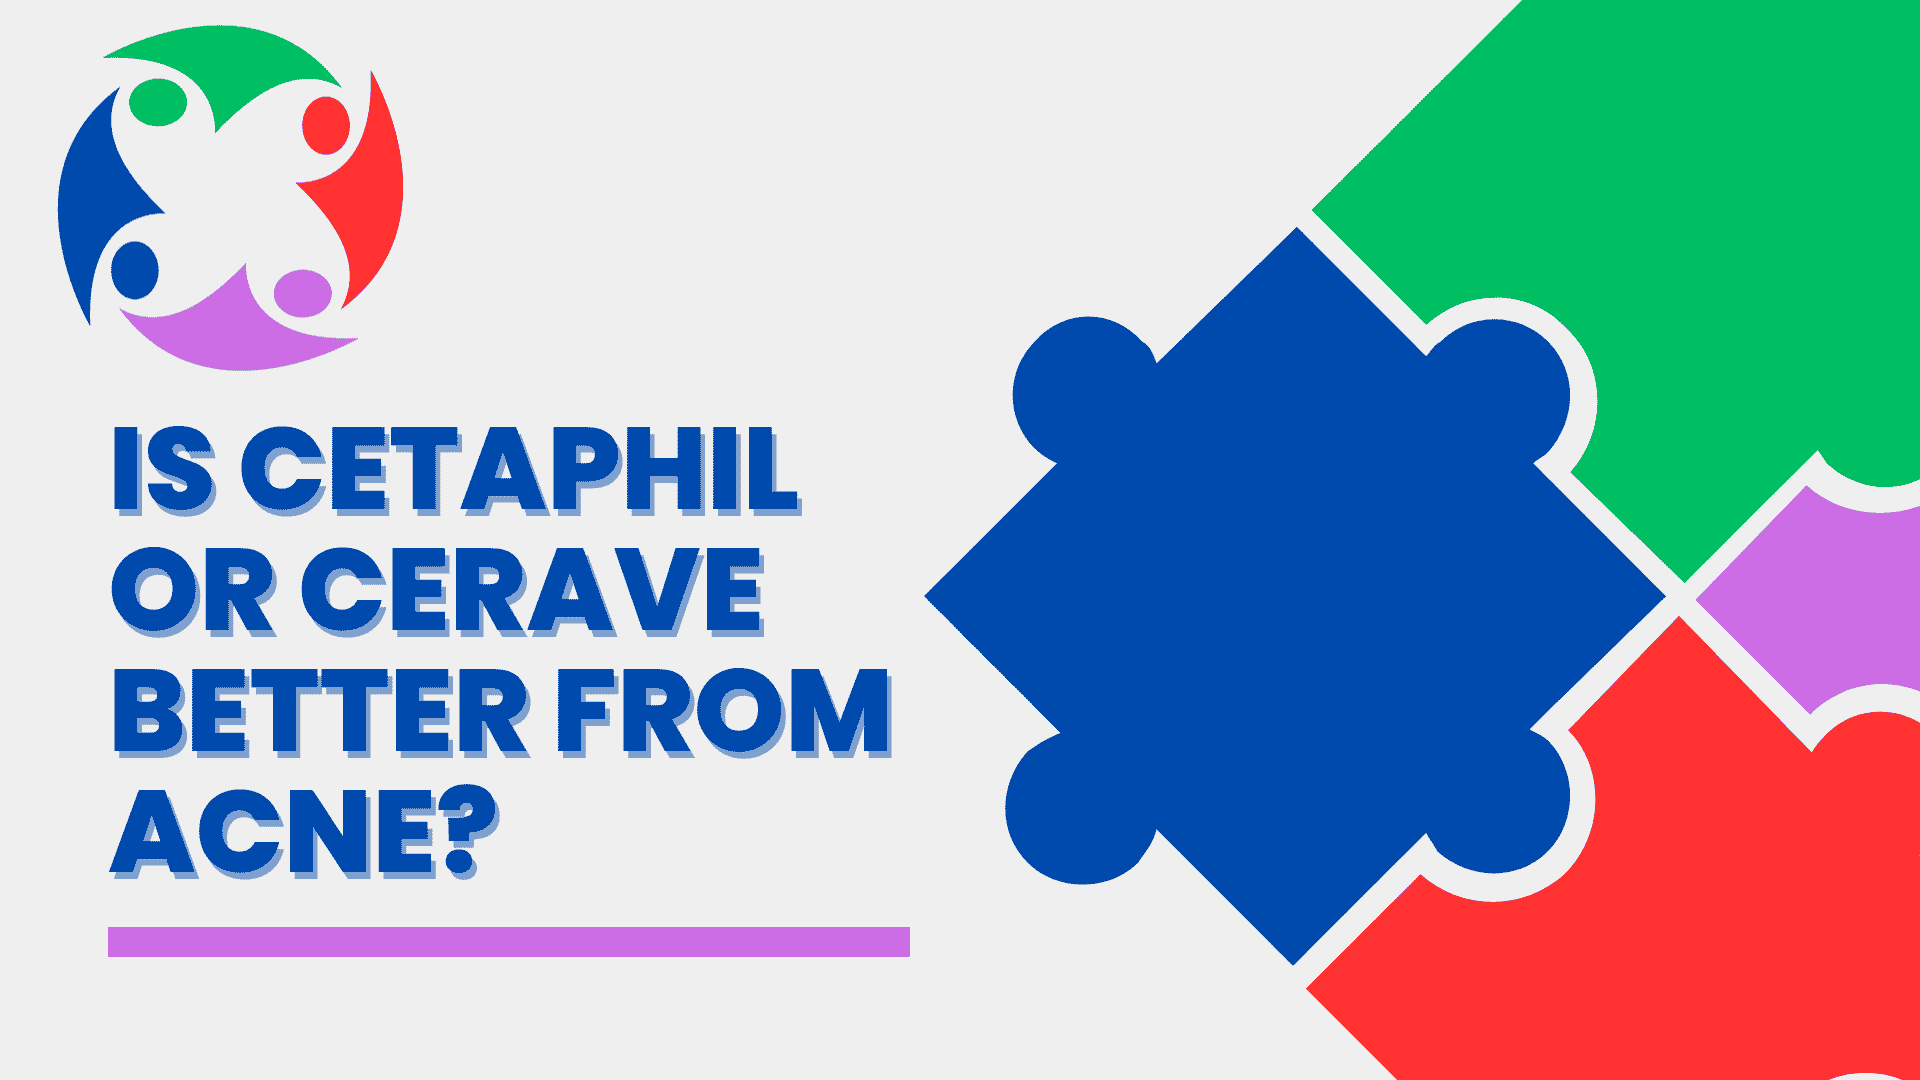 Is Cetaphil or Cerave better from Acne?